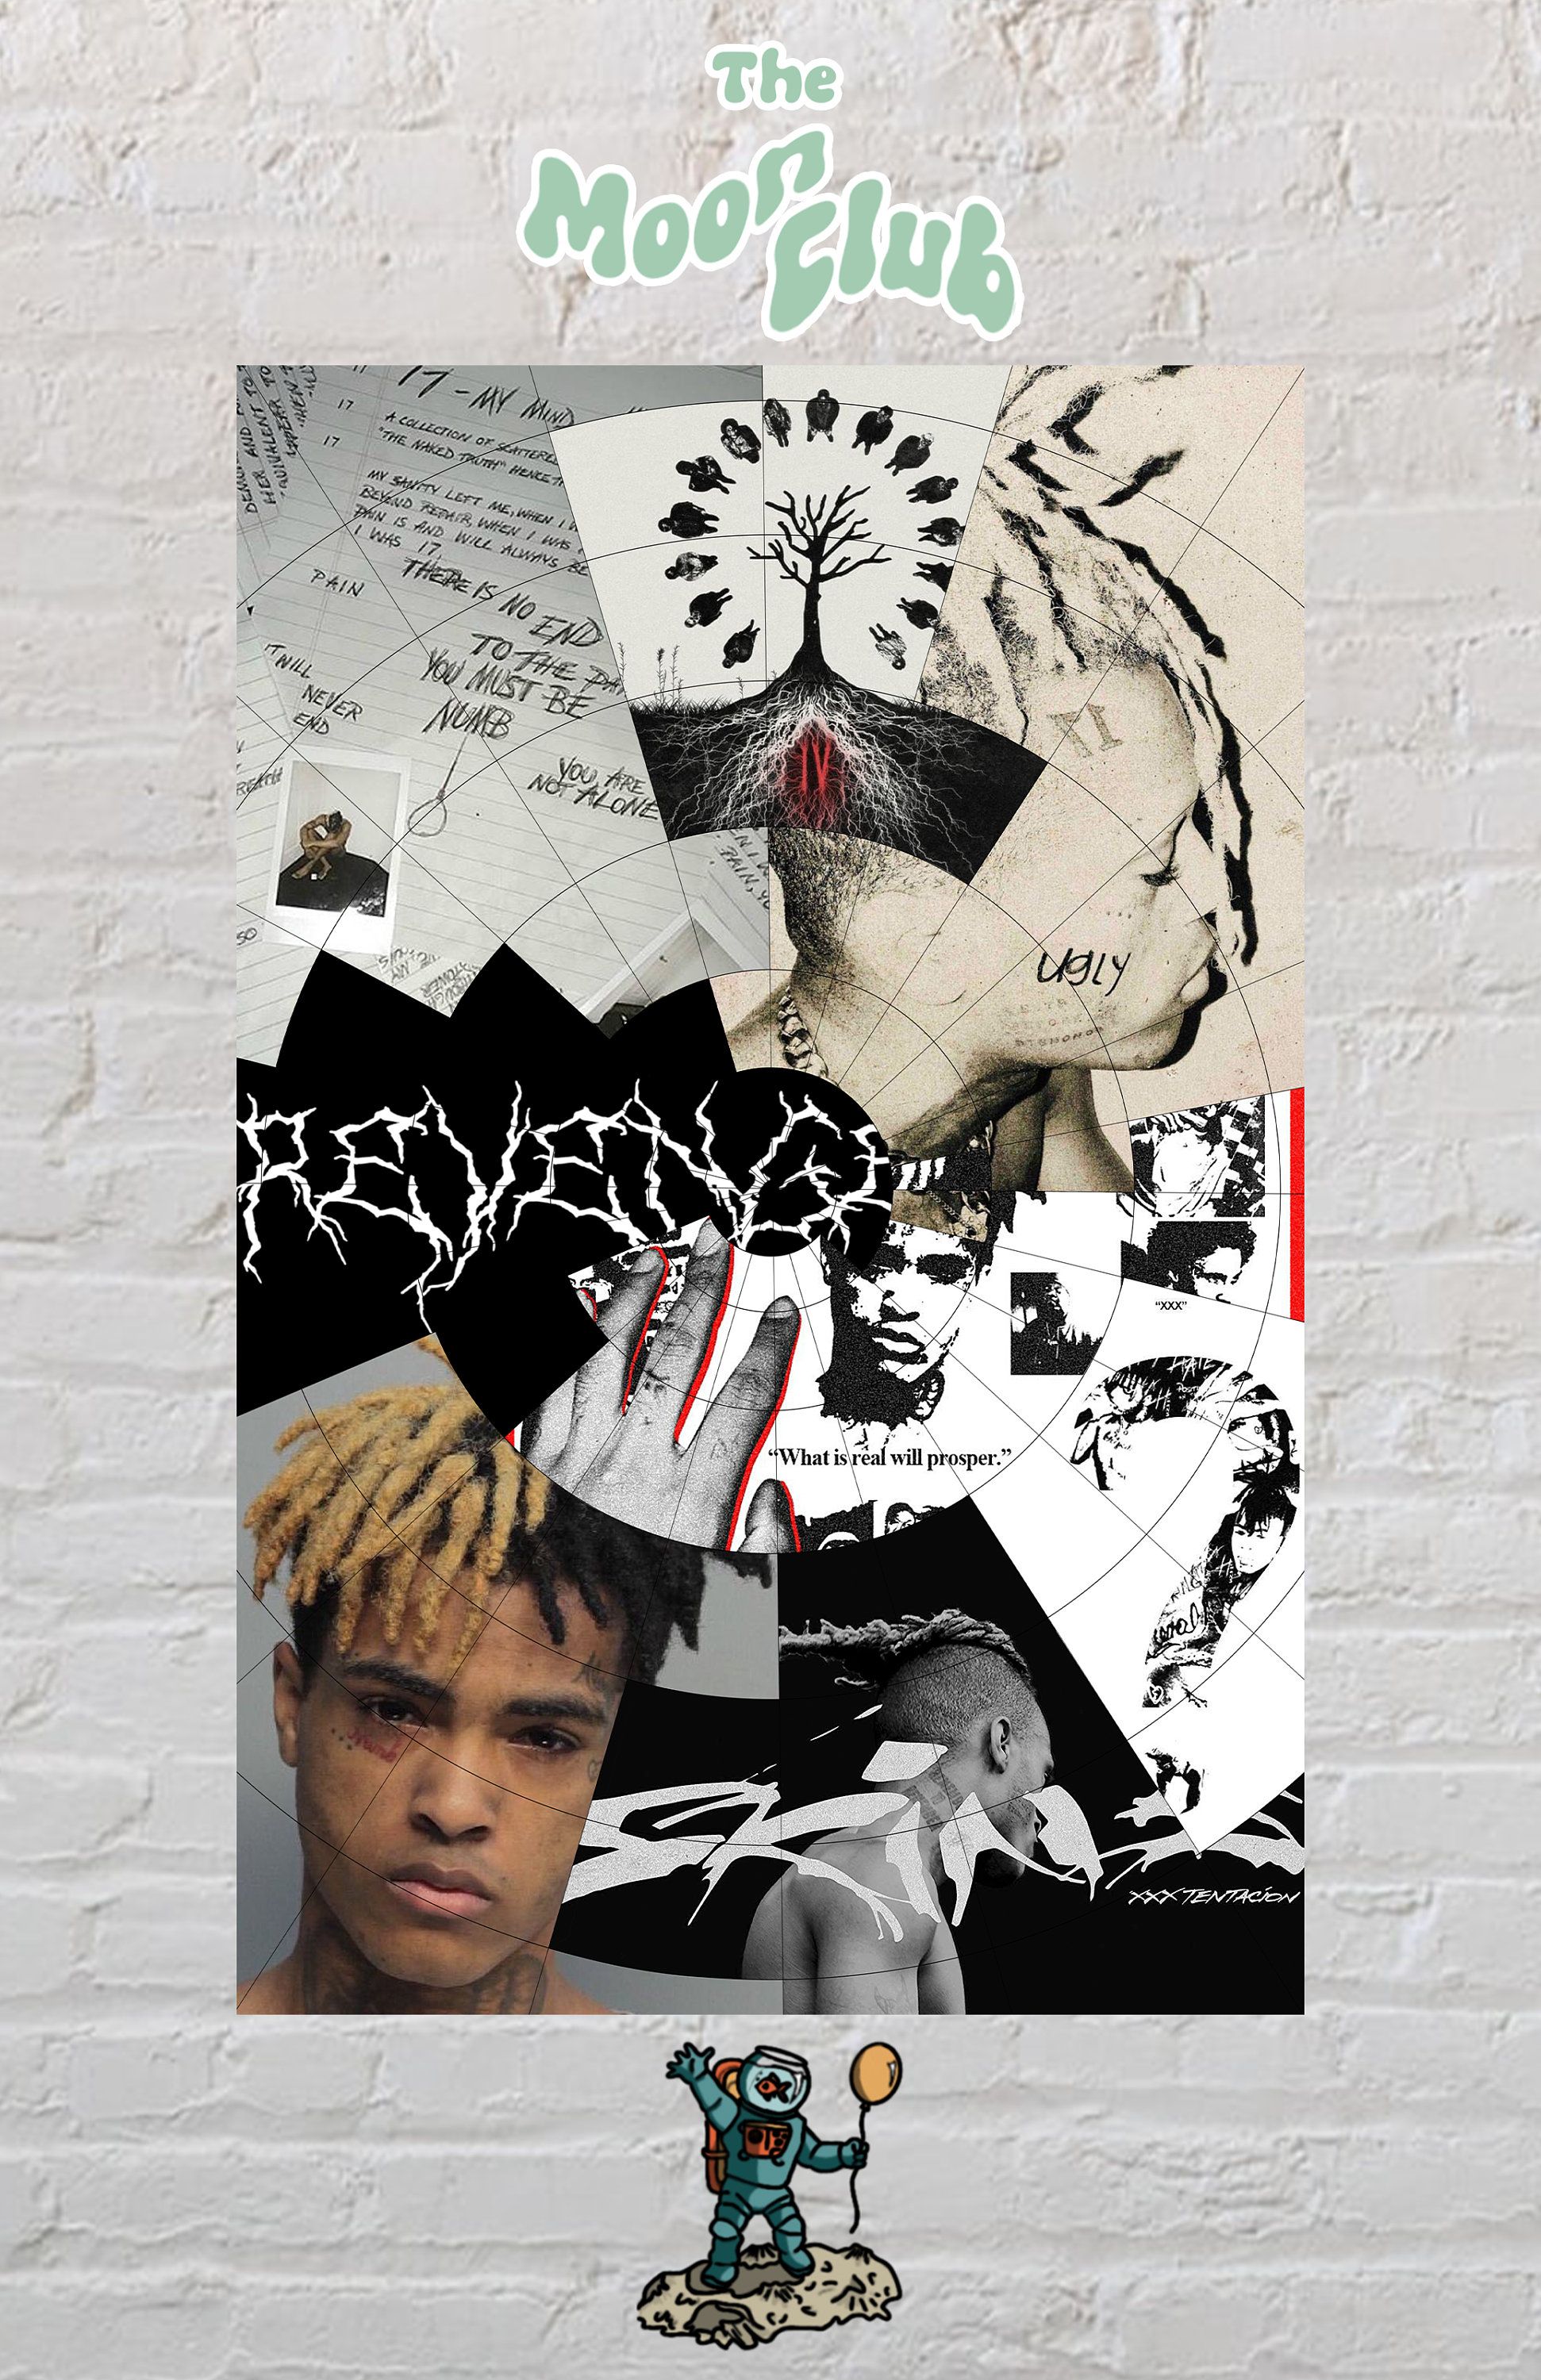 A collage of various images including a young man with dreadlocks, a cartoon character and a tree. - XXXTentacion